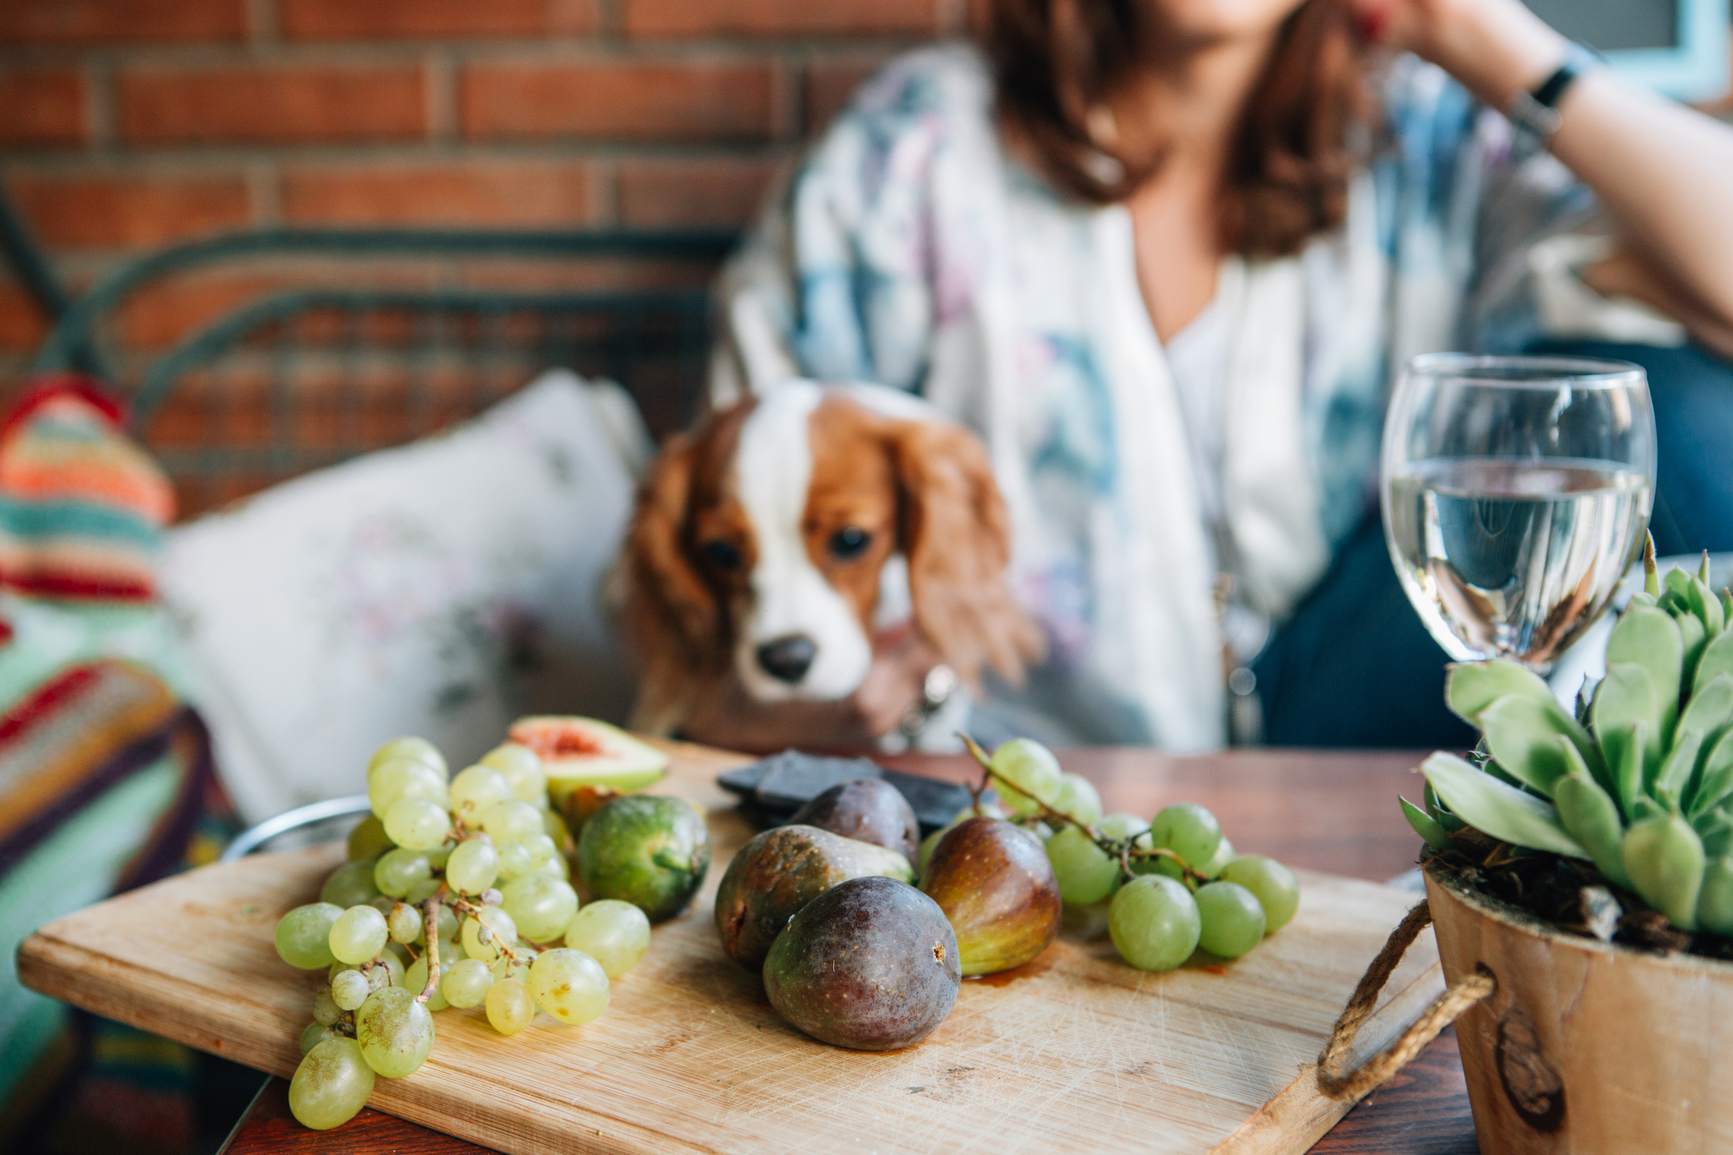 Dog staring at grapes and figs on a cutting board.